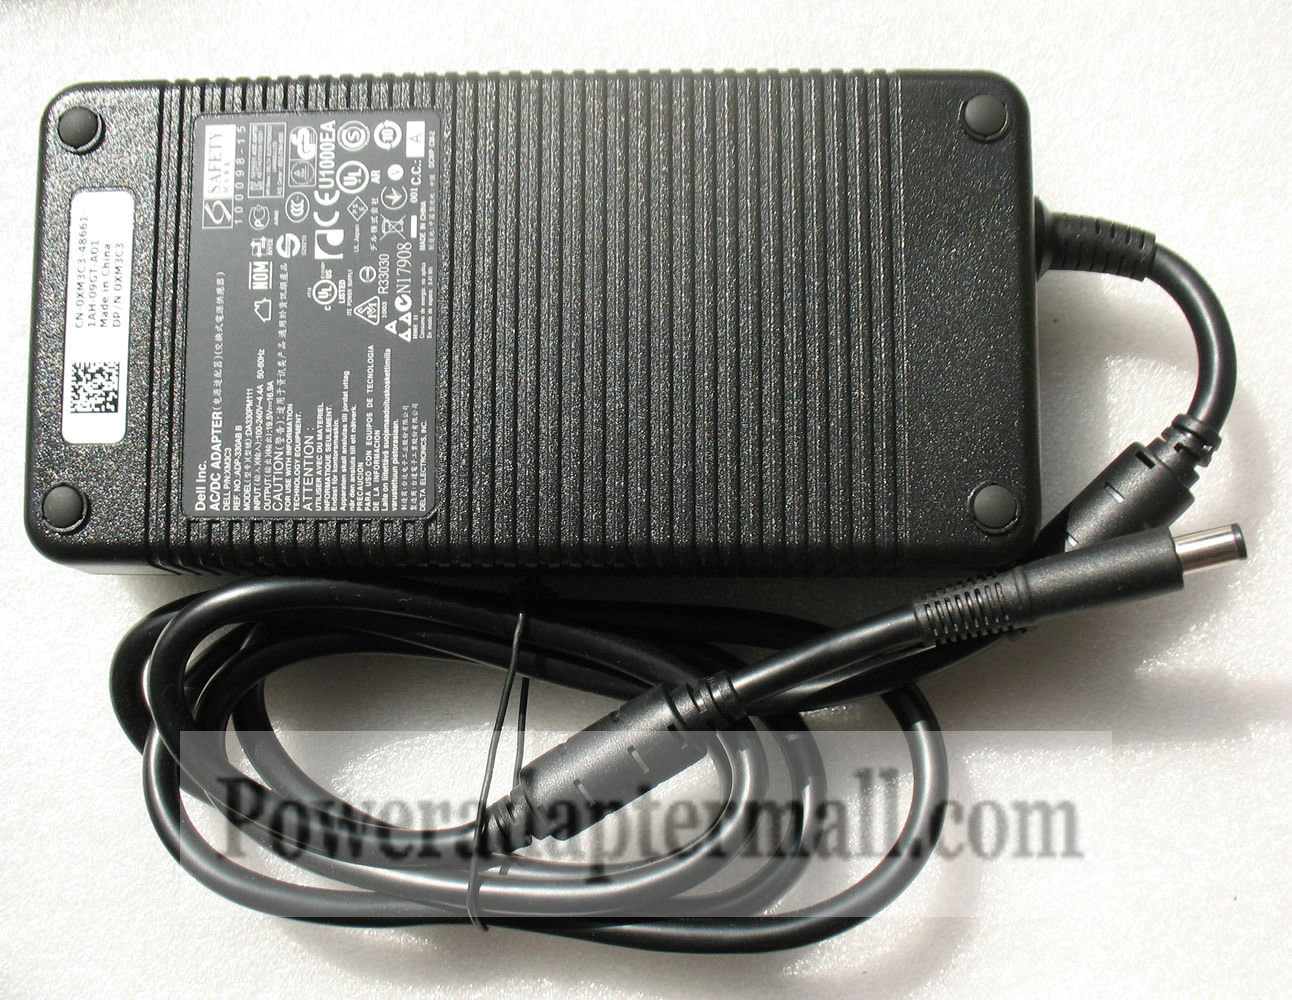 19.5V 16.9A 330W Dell Alienware M18 XR2 AC Adapter power